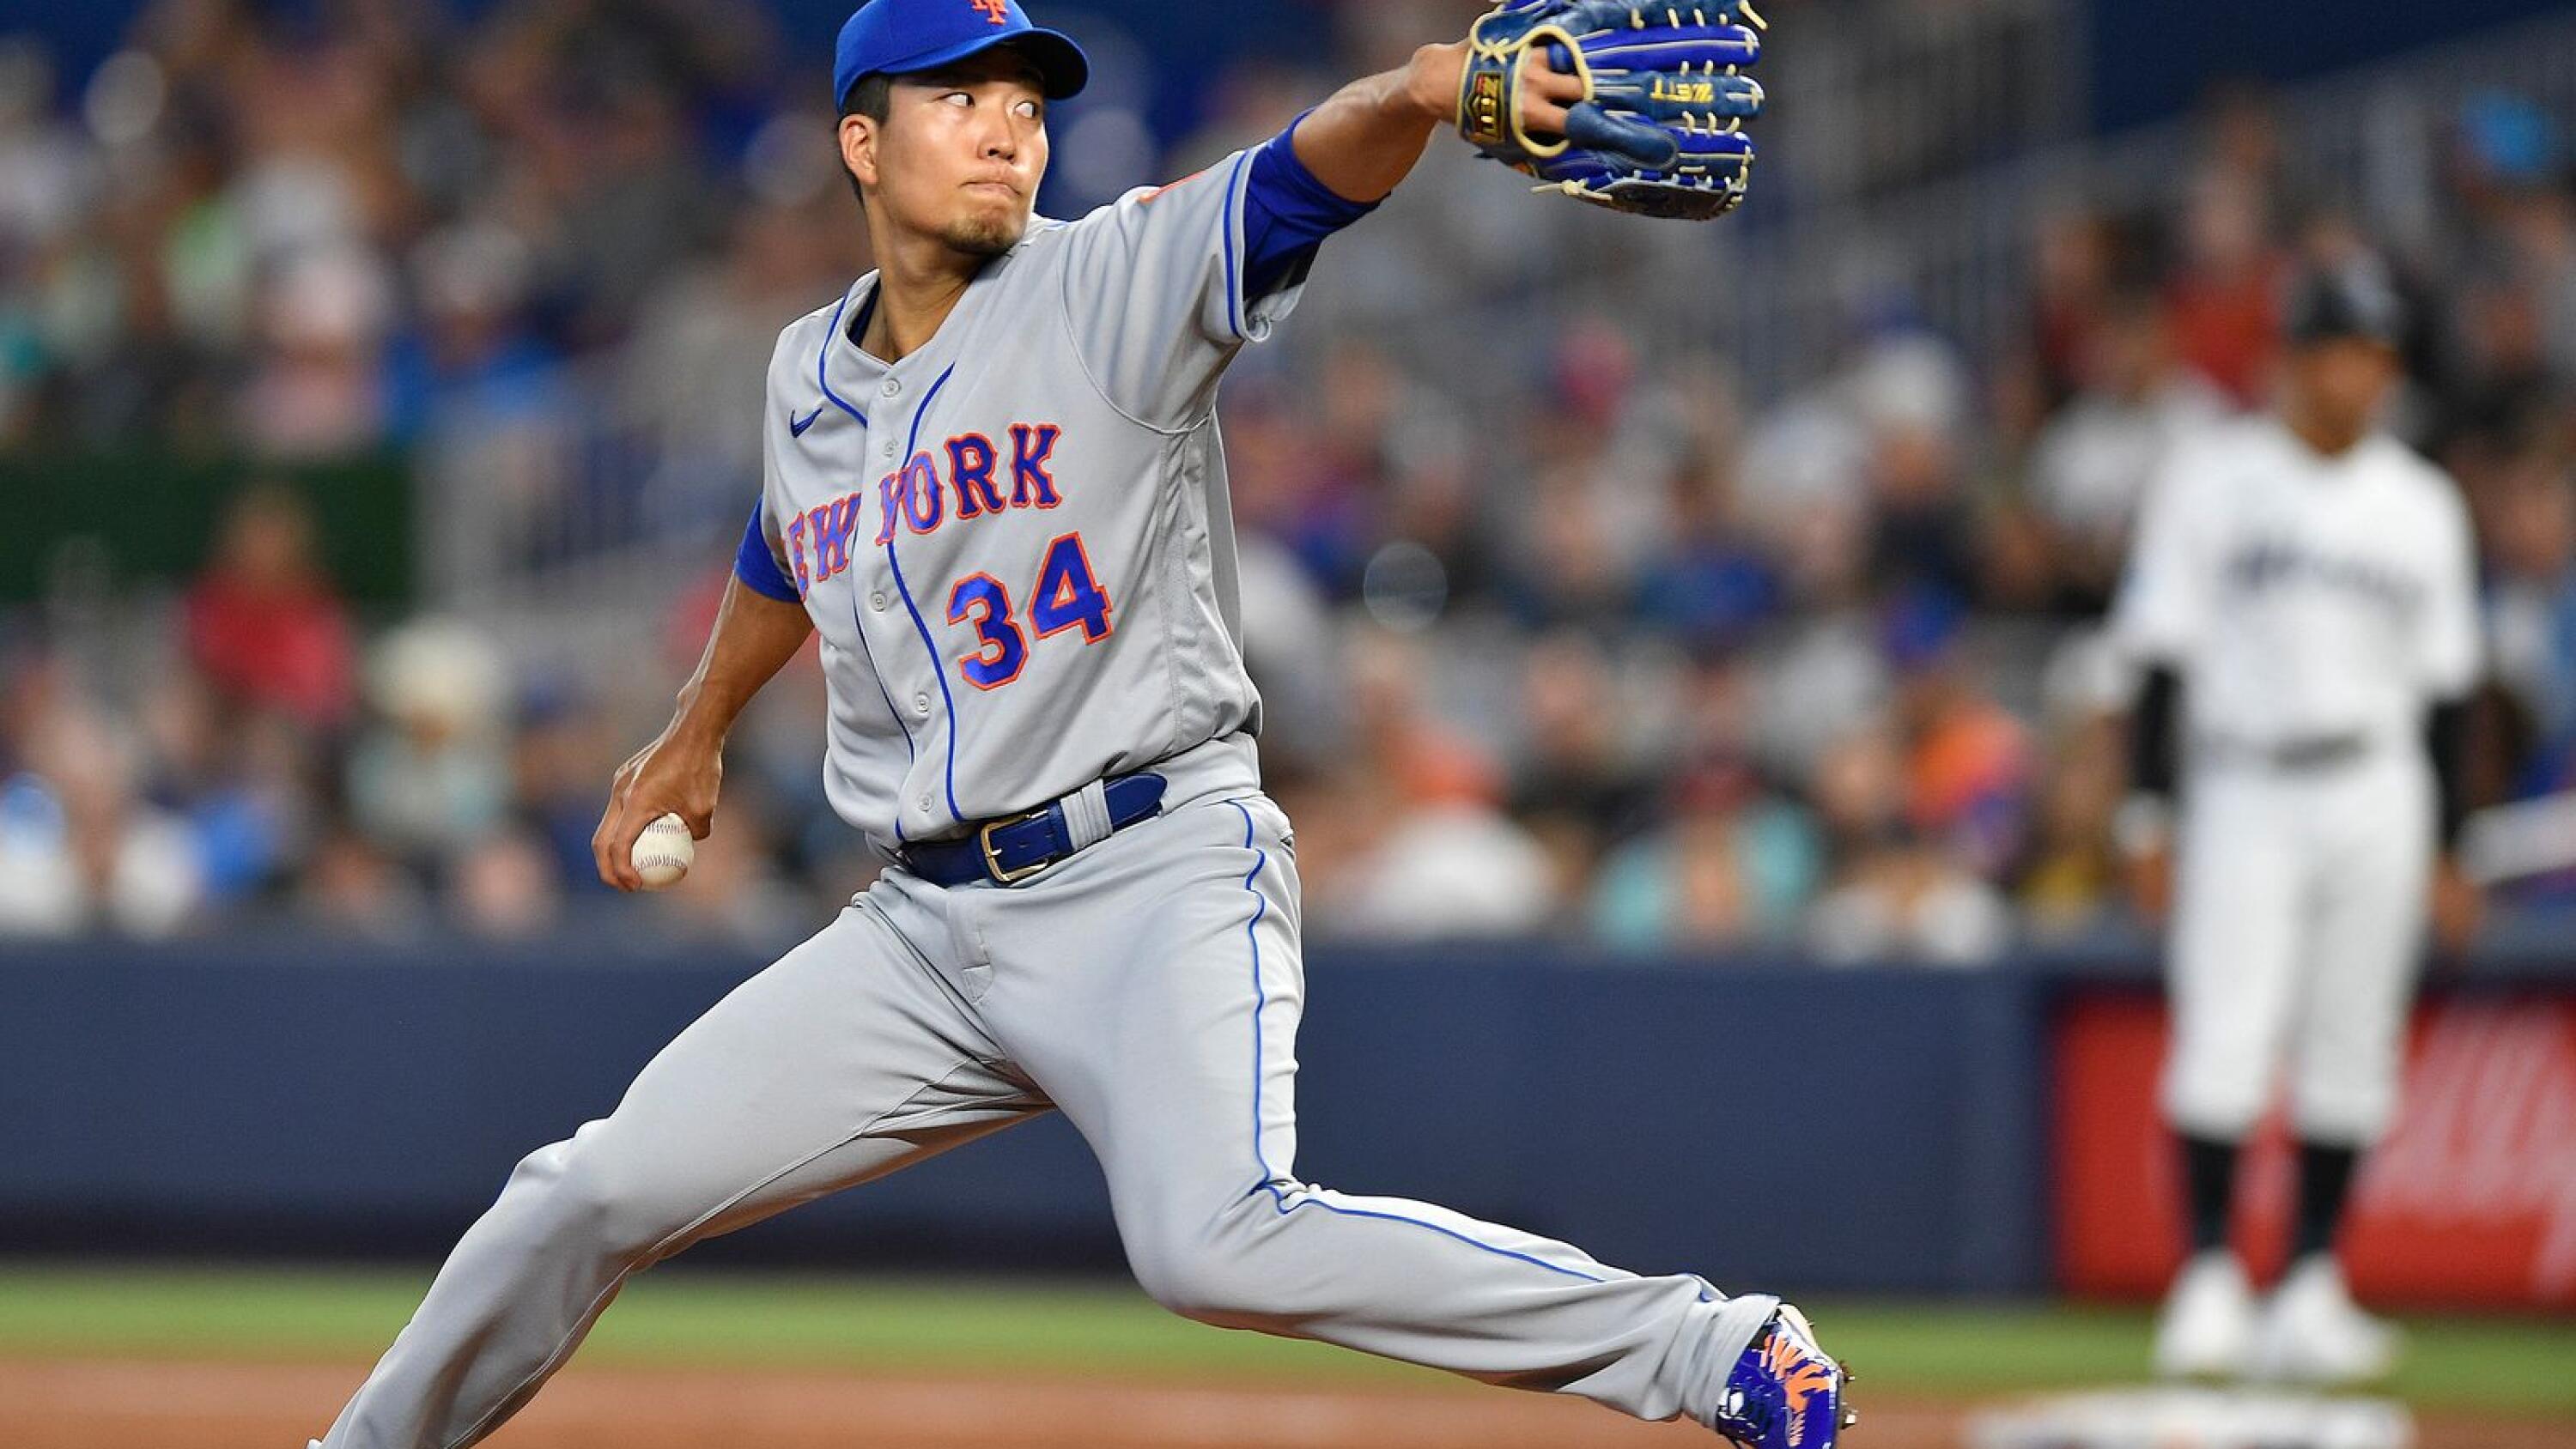 Senga pitches Mets past Marlins in Citi Field debut